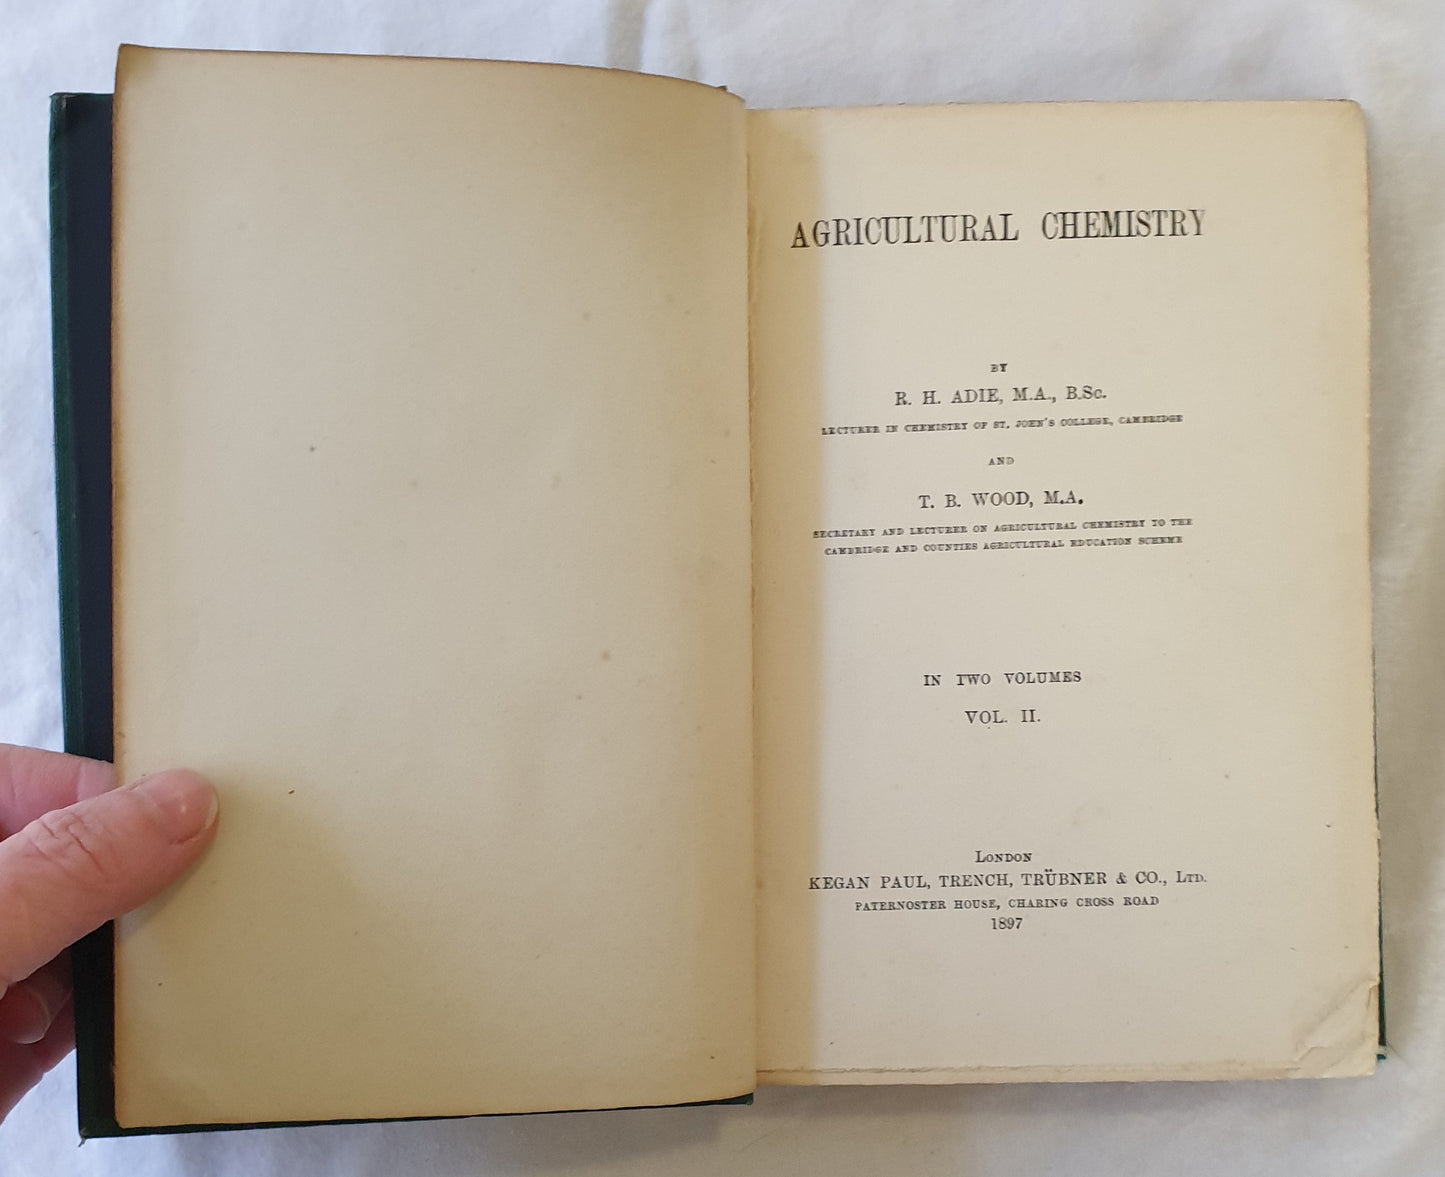 Agricultural Chemistry  In Two Volumes  by R. H. Adie and T. B. Wood  Vol. II